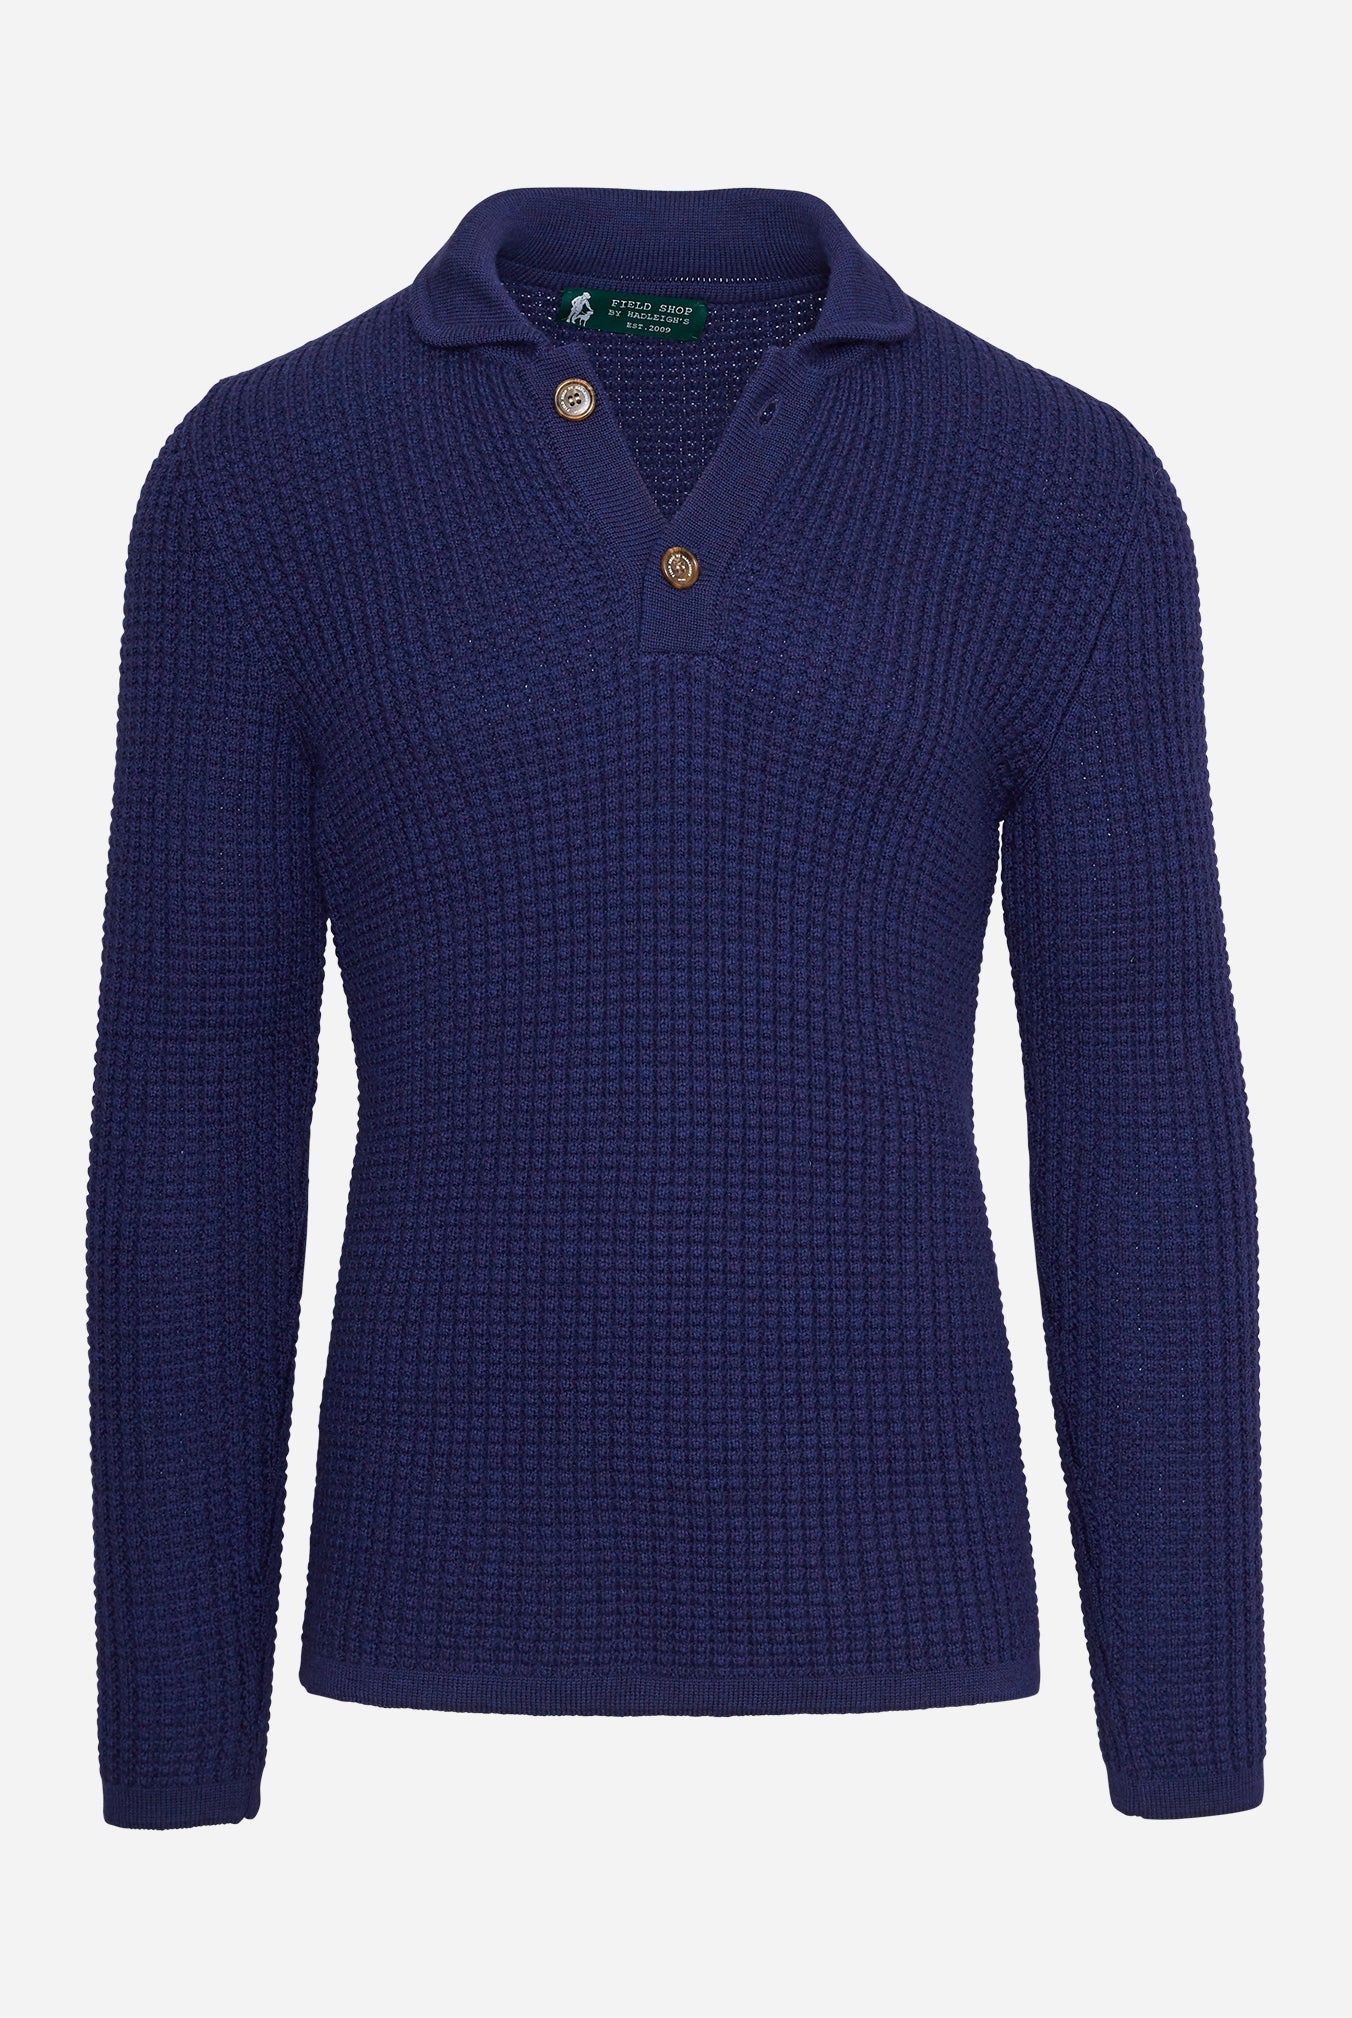 Waffle Knit Collared Sweater in Prussian Blue